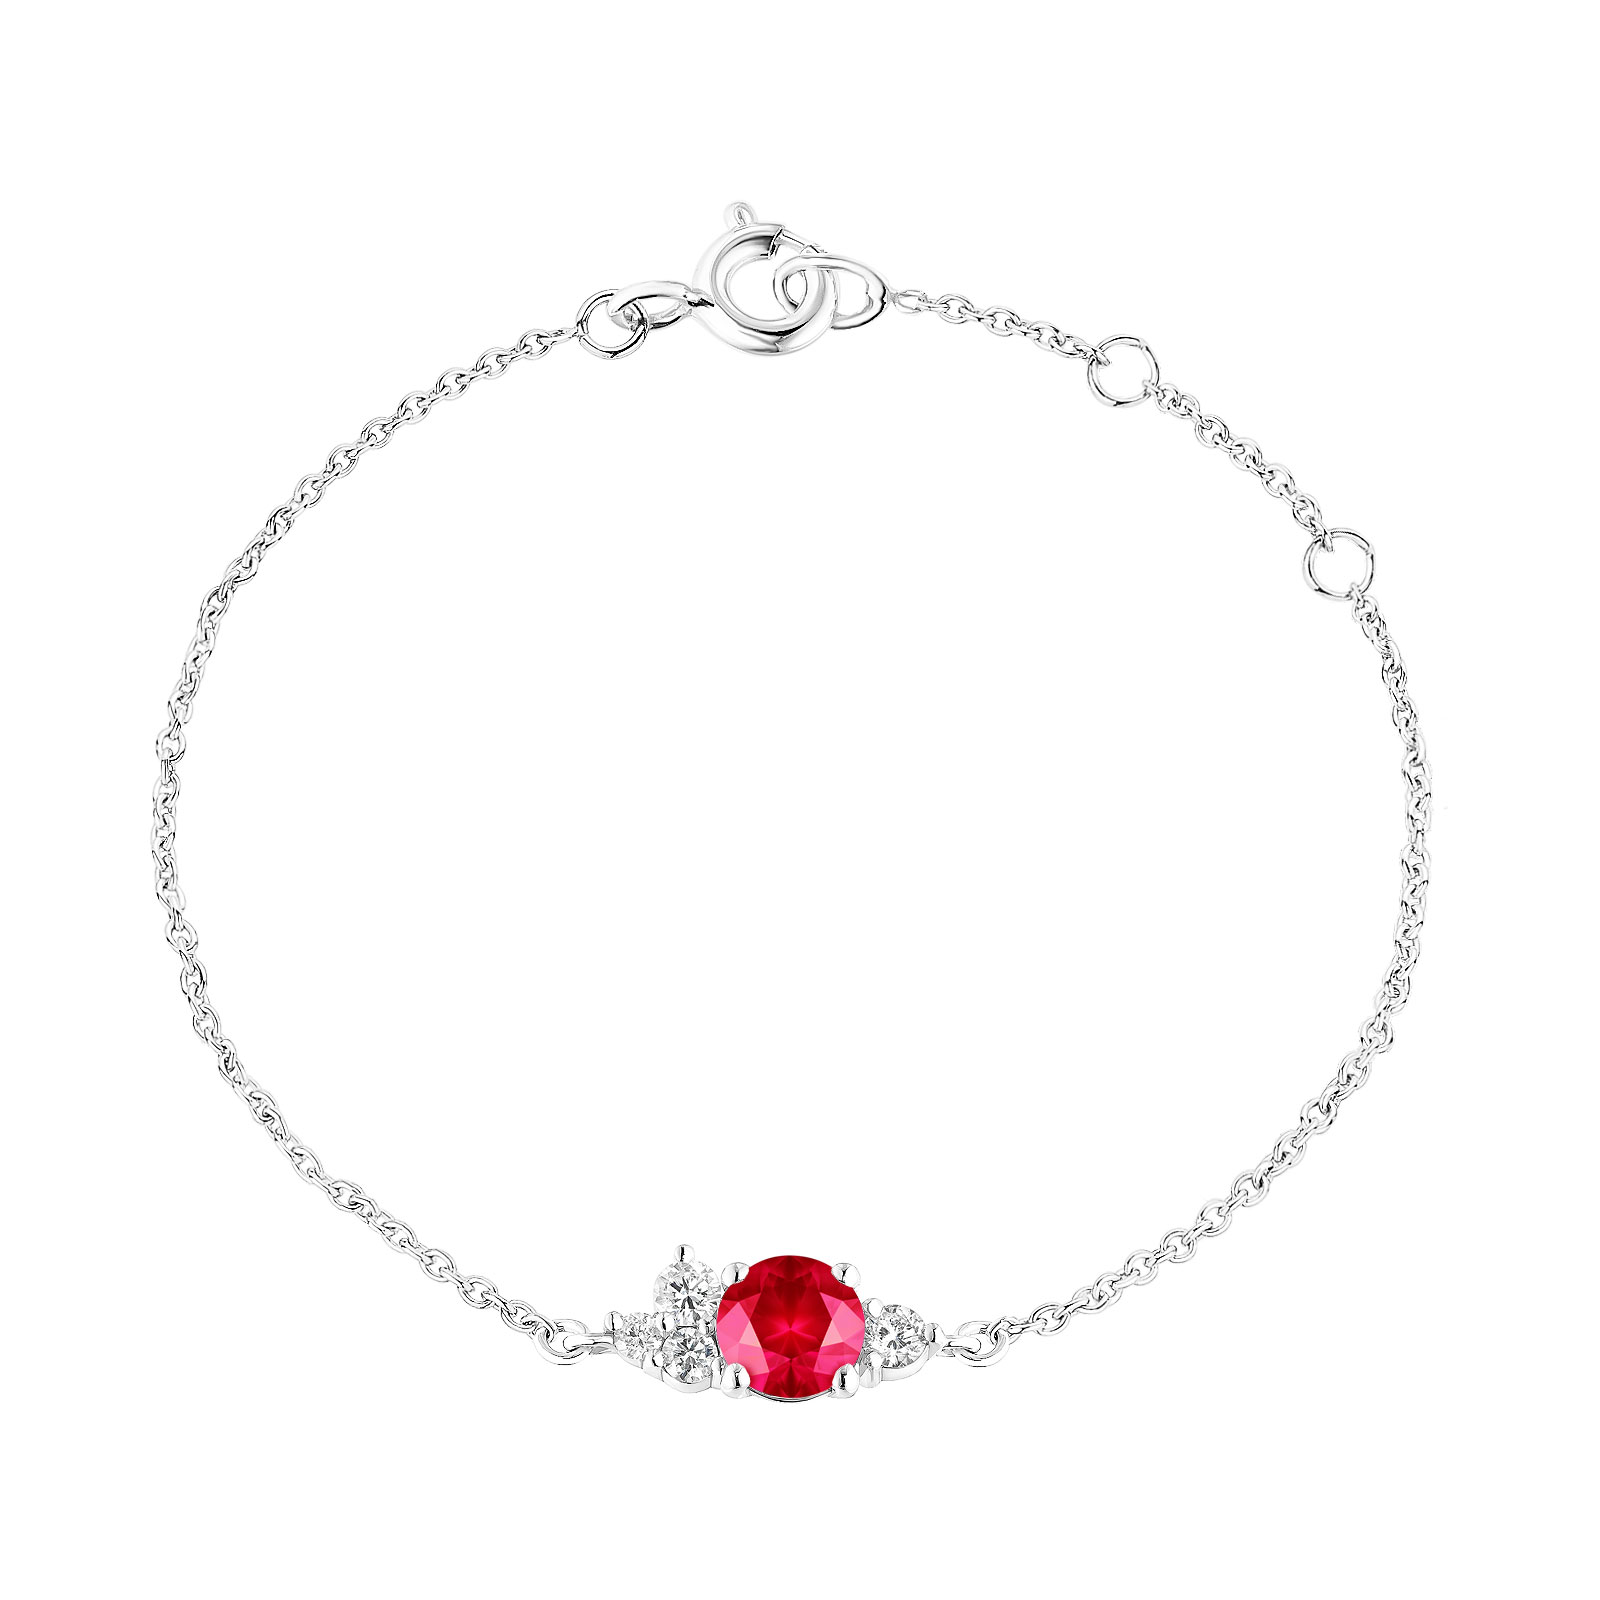 Bracelet White gold Ruby and diamonds Baby EverBloom 1